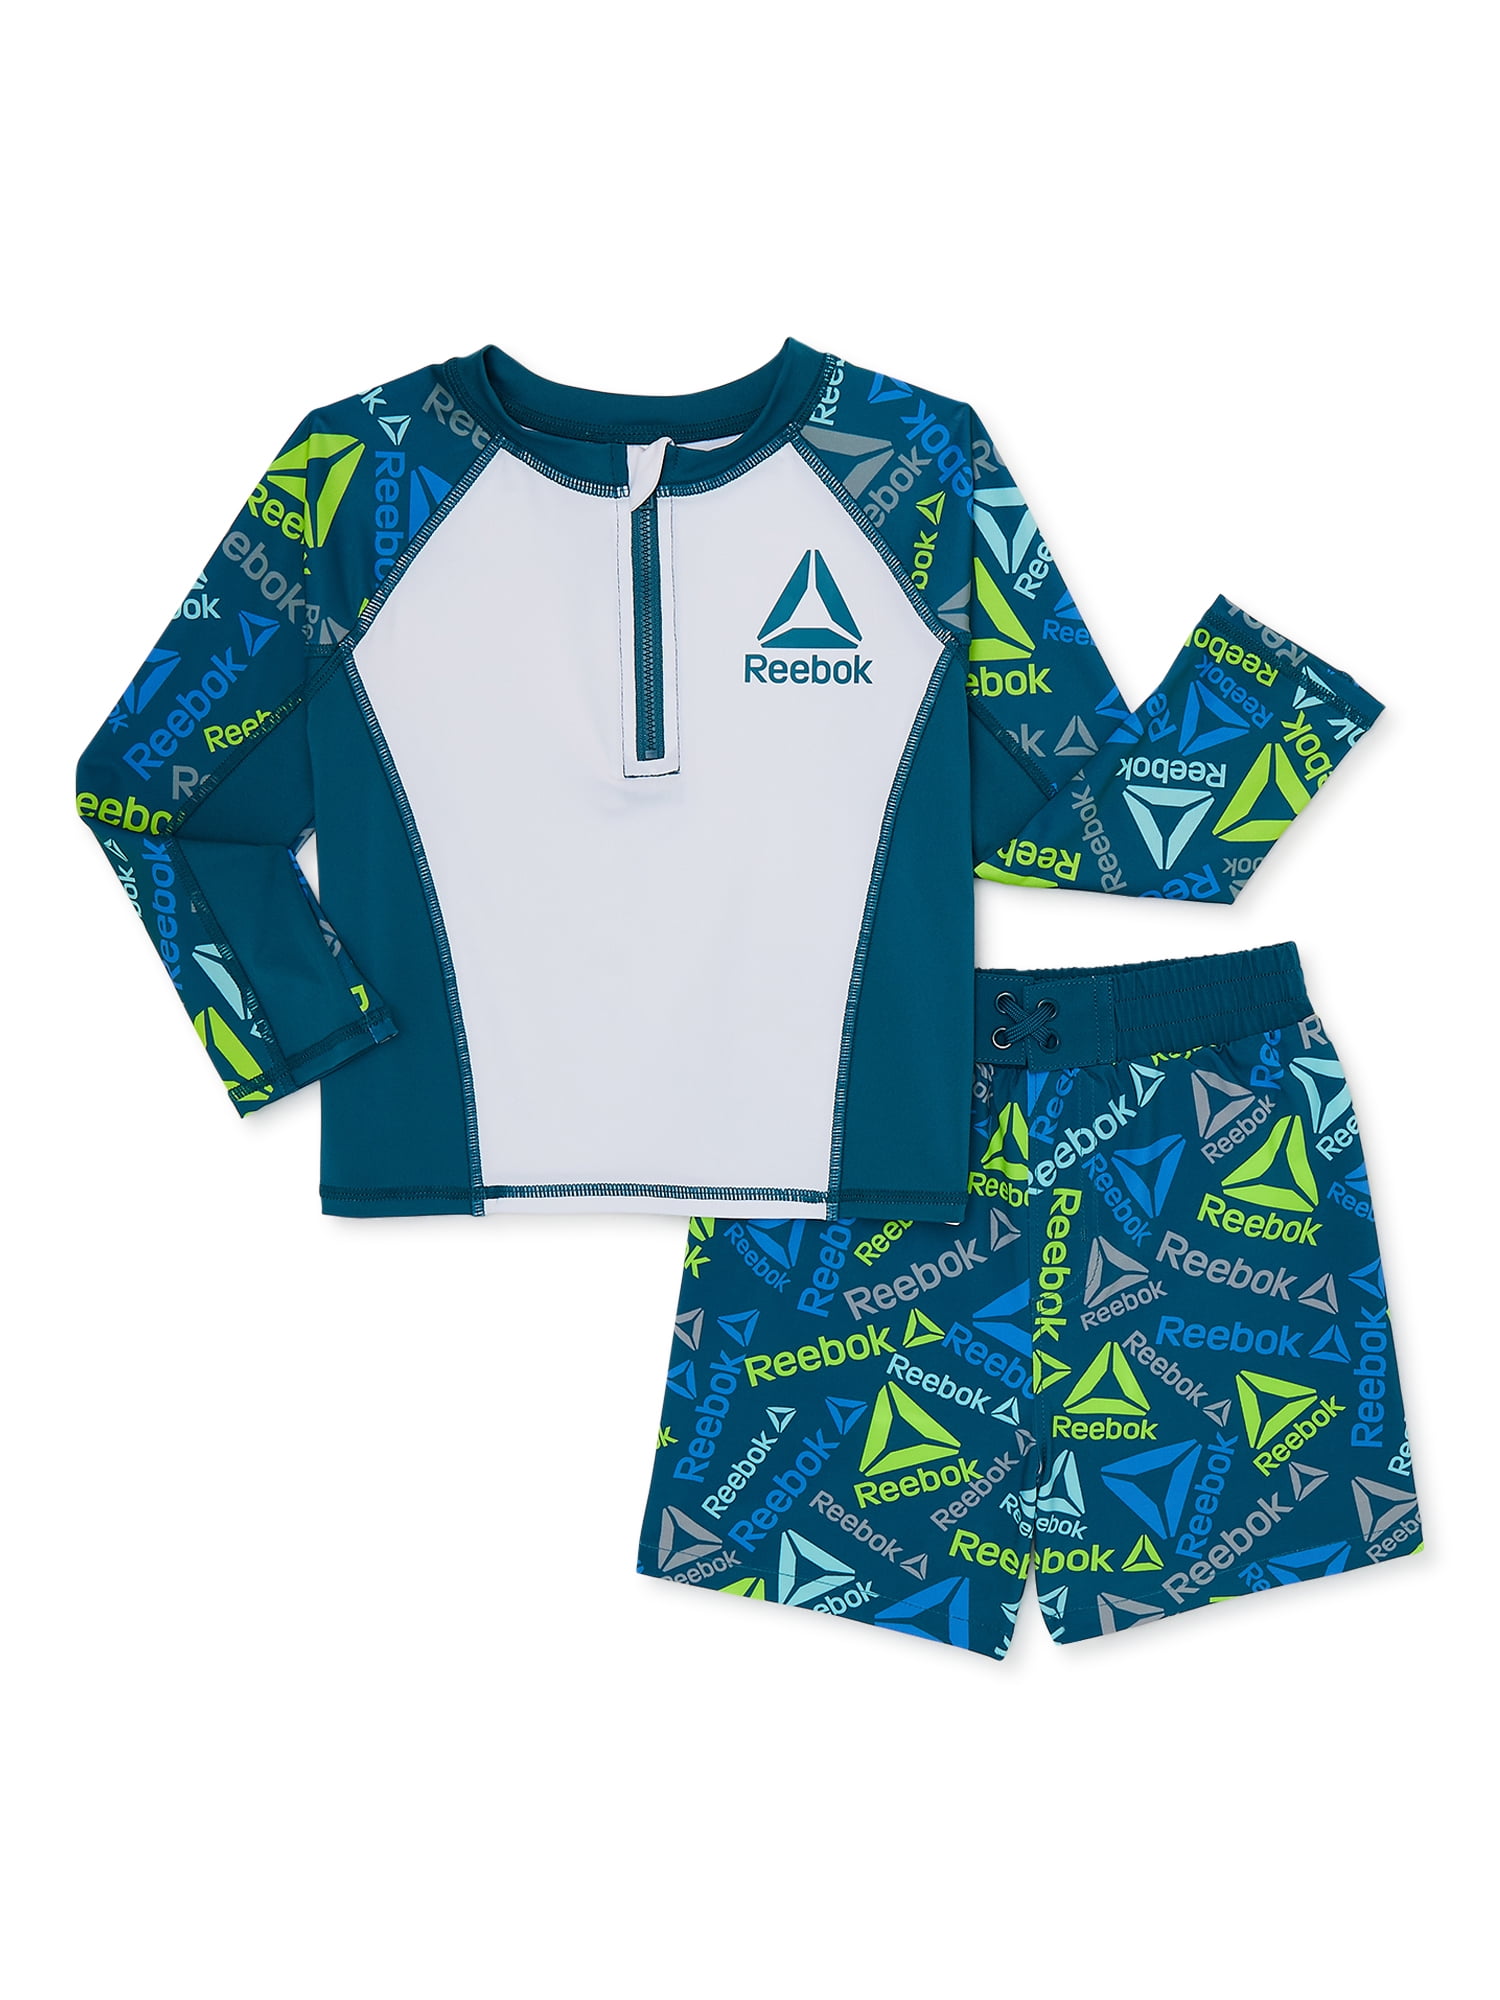 vandfald strømper Konkurrence Reebok Toddler Boys Long Sleeve Rashguard and Swim Trunks Set with UPF 50+,  2-Piece, Sizes 2T-5T, No Straps, Set Includes a Top and Trunk - Walmart.com